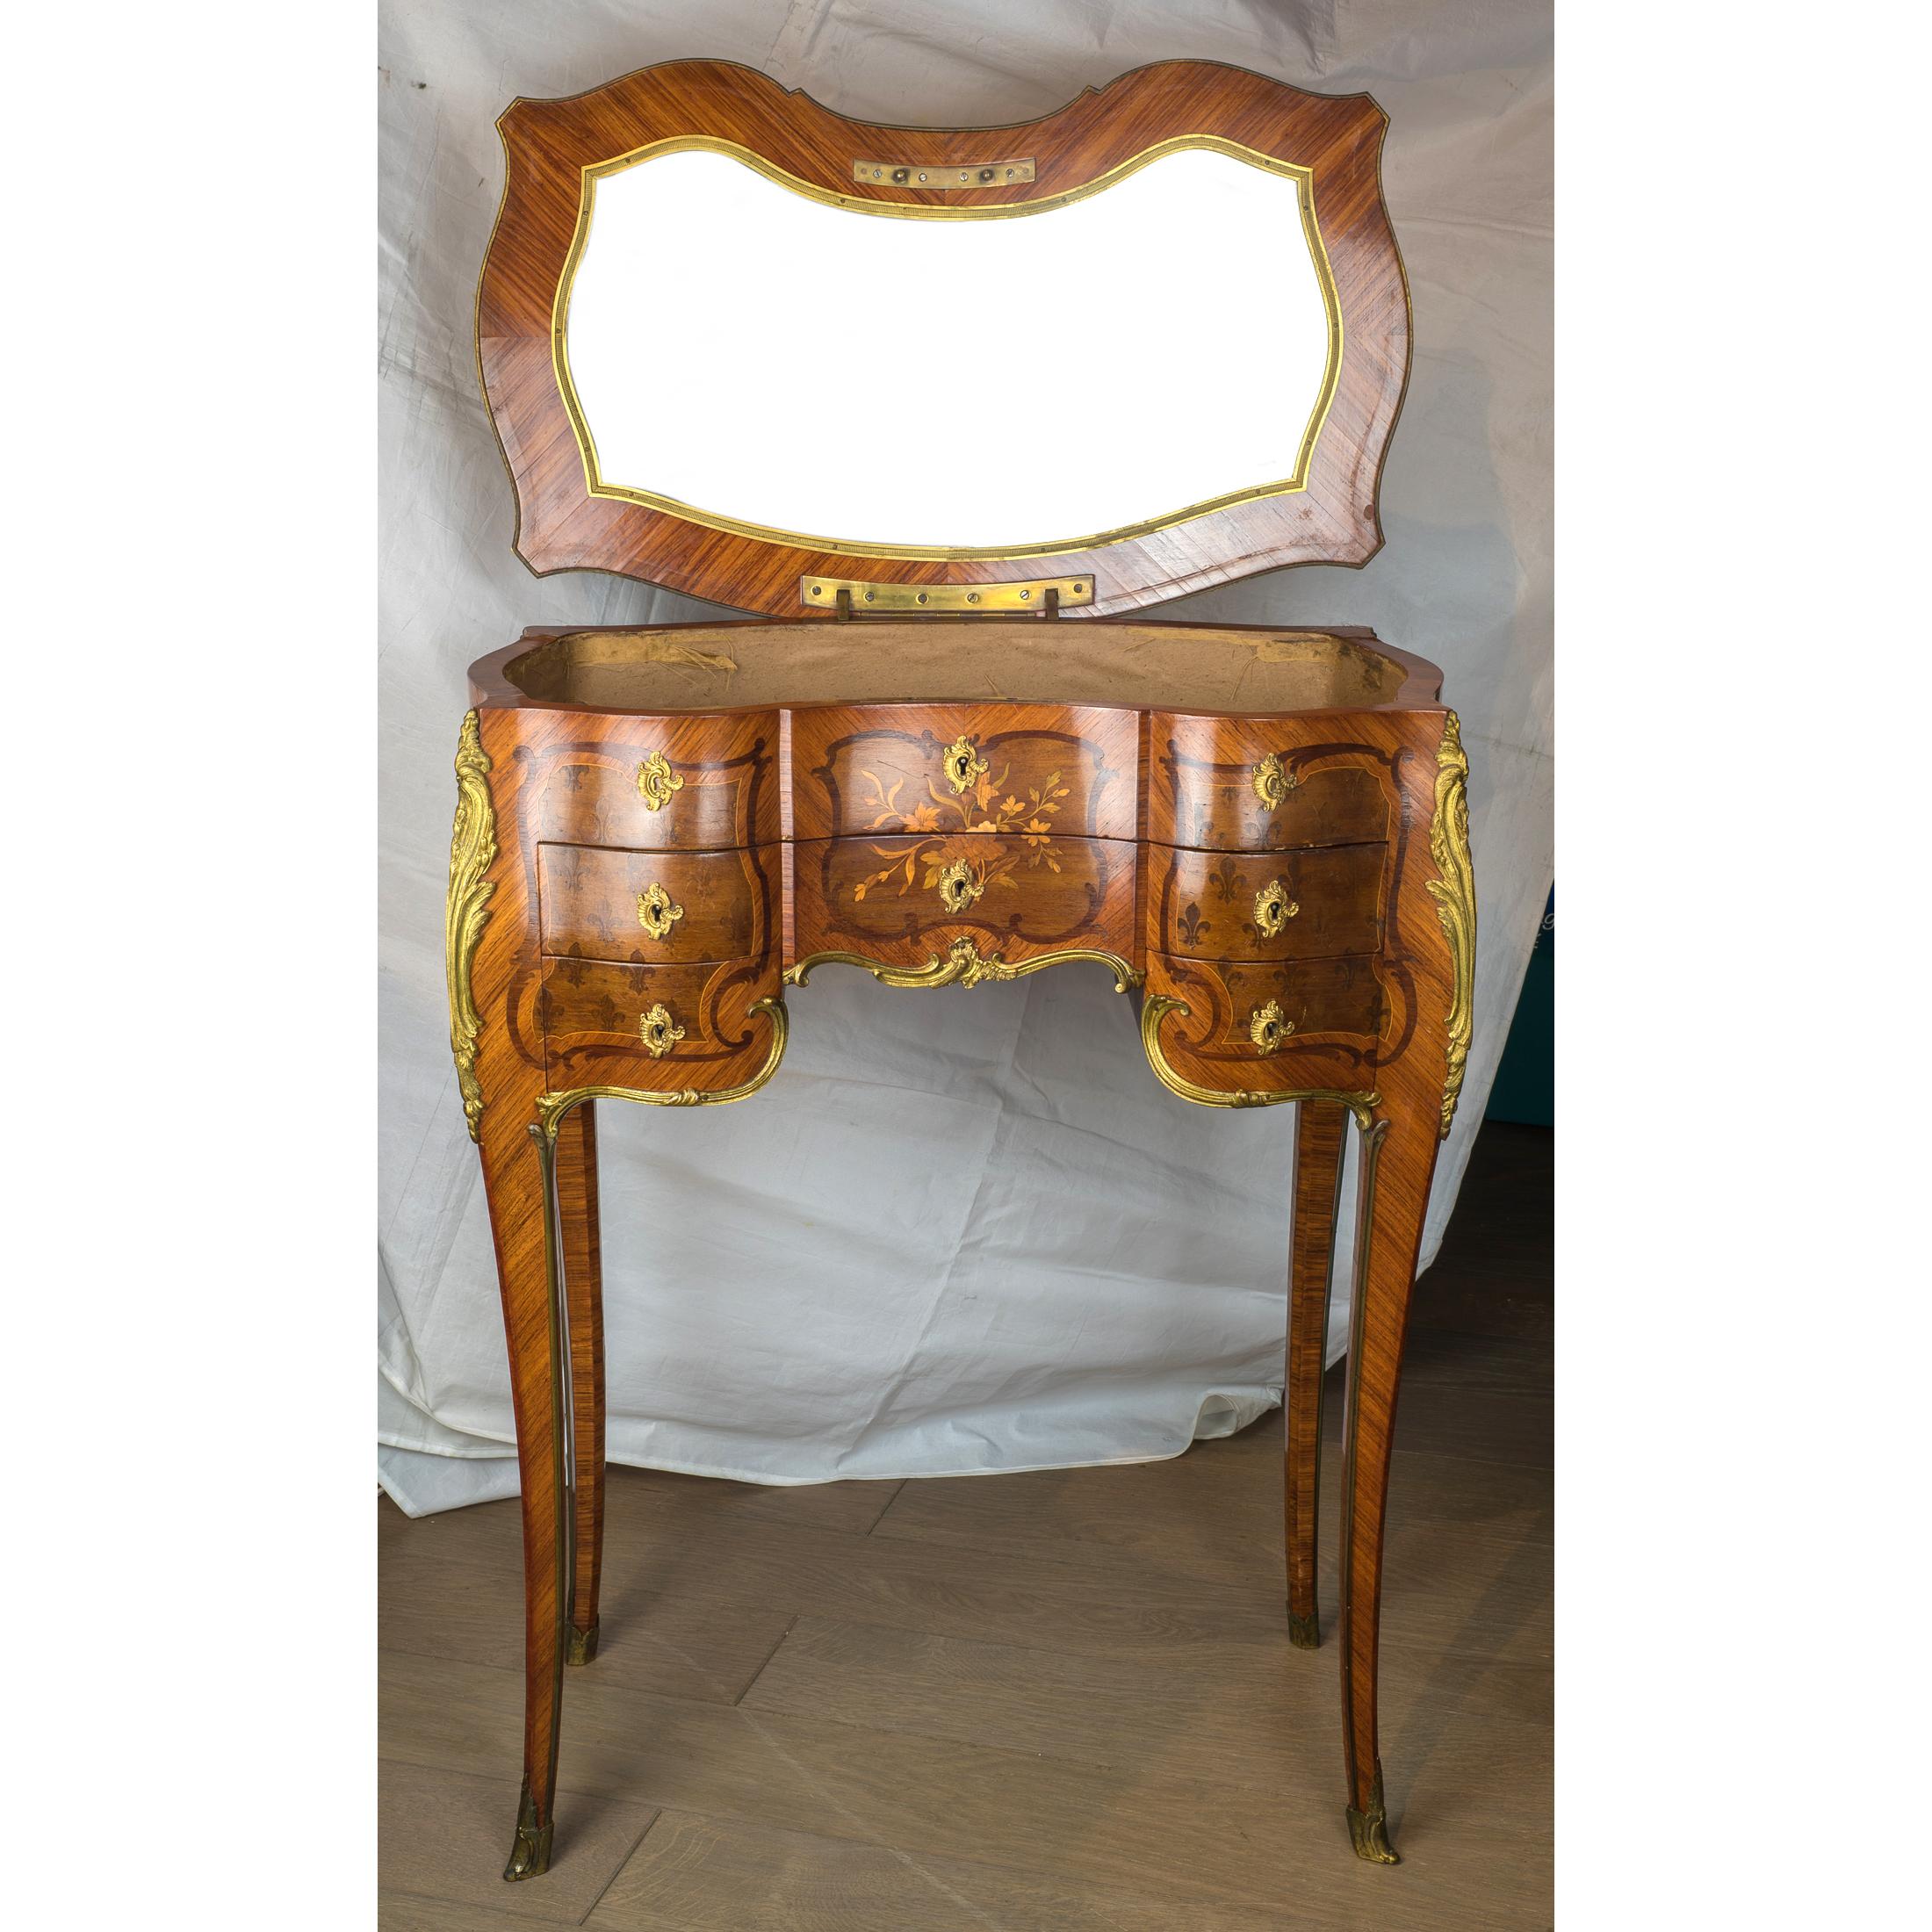 19th Century French Kingwood and Mahogany-Veneered Ormolu-Mounted Dressing Table For Sale